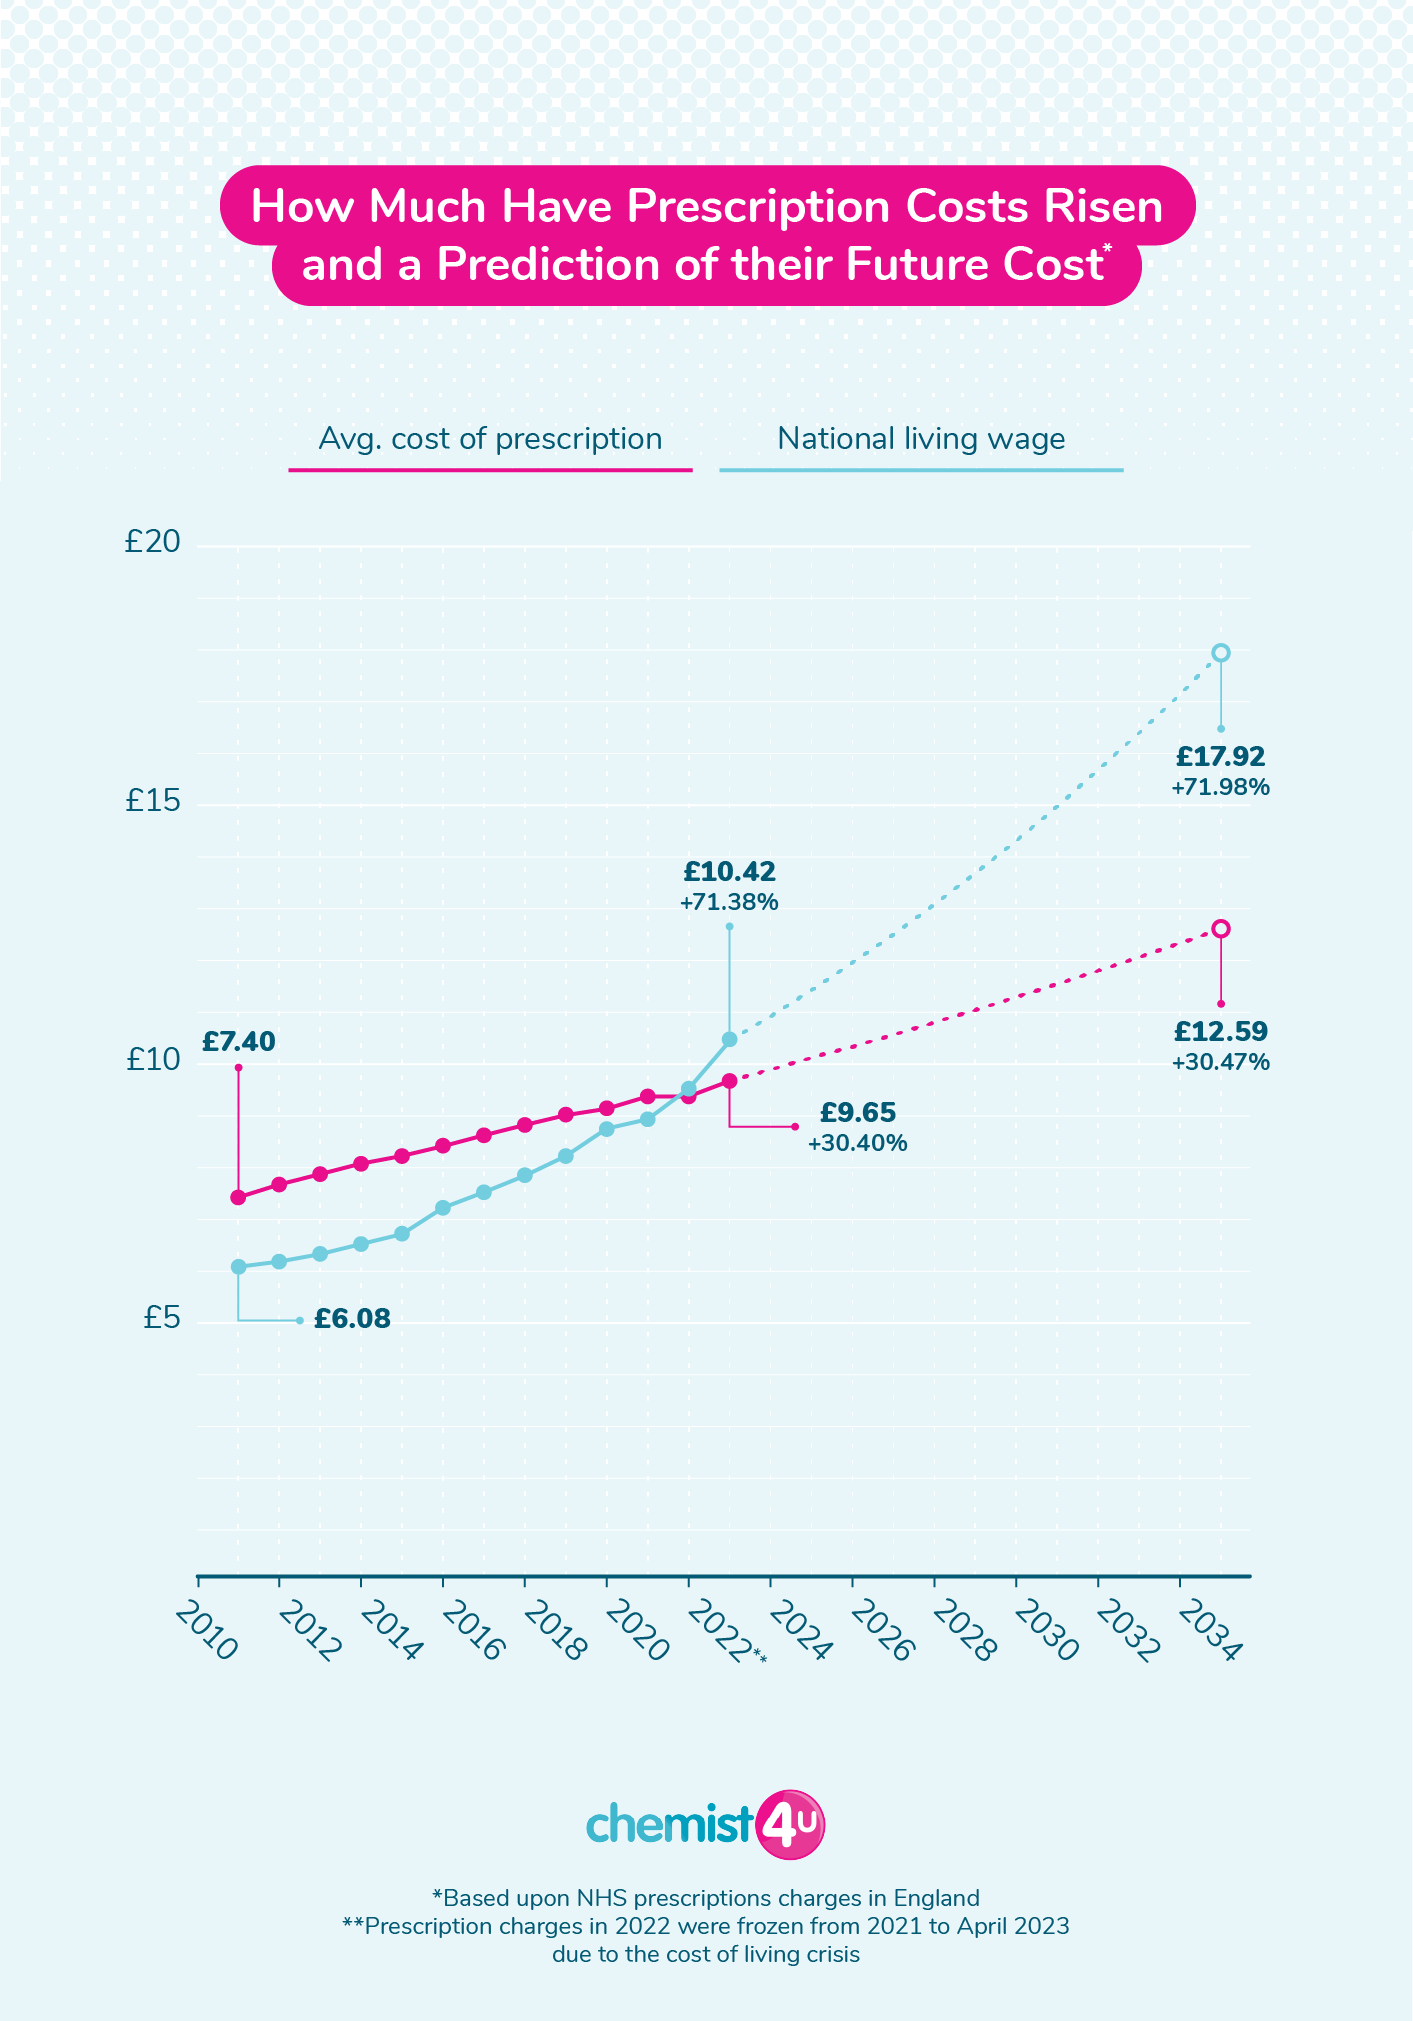 A graph showing the recent increases in prescription costs, and forecasting the future costs.